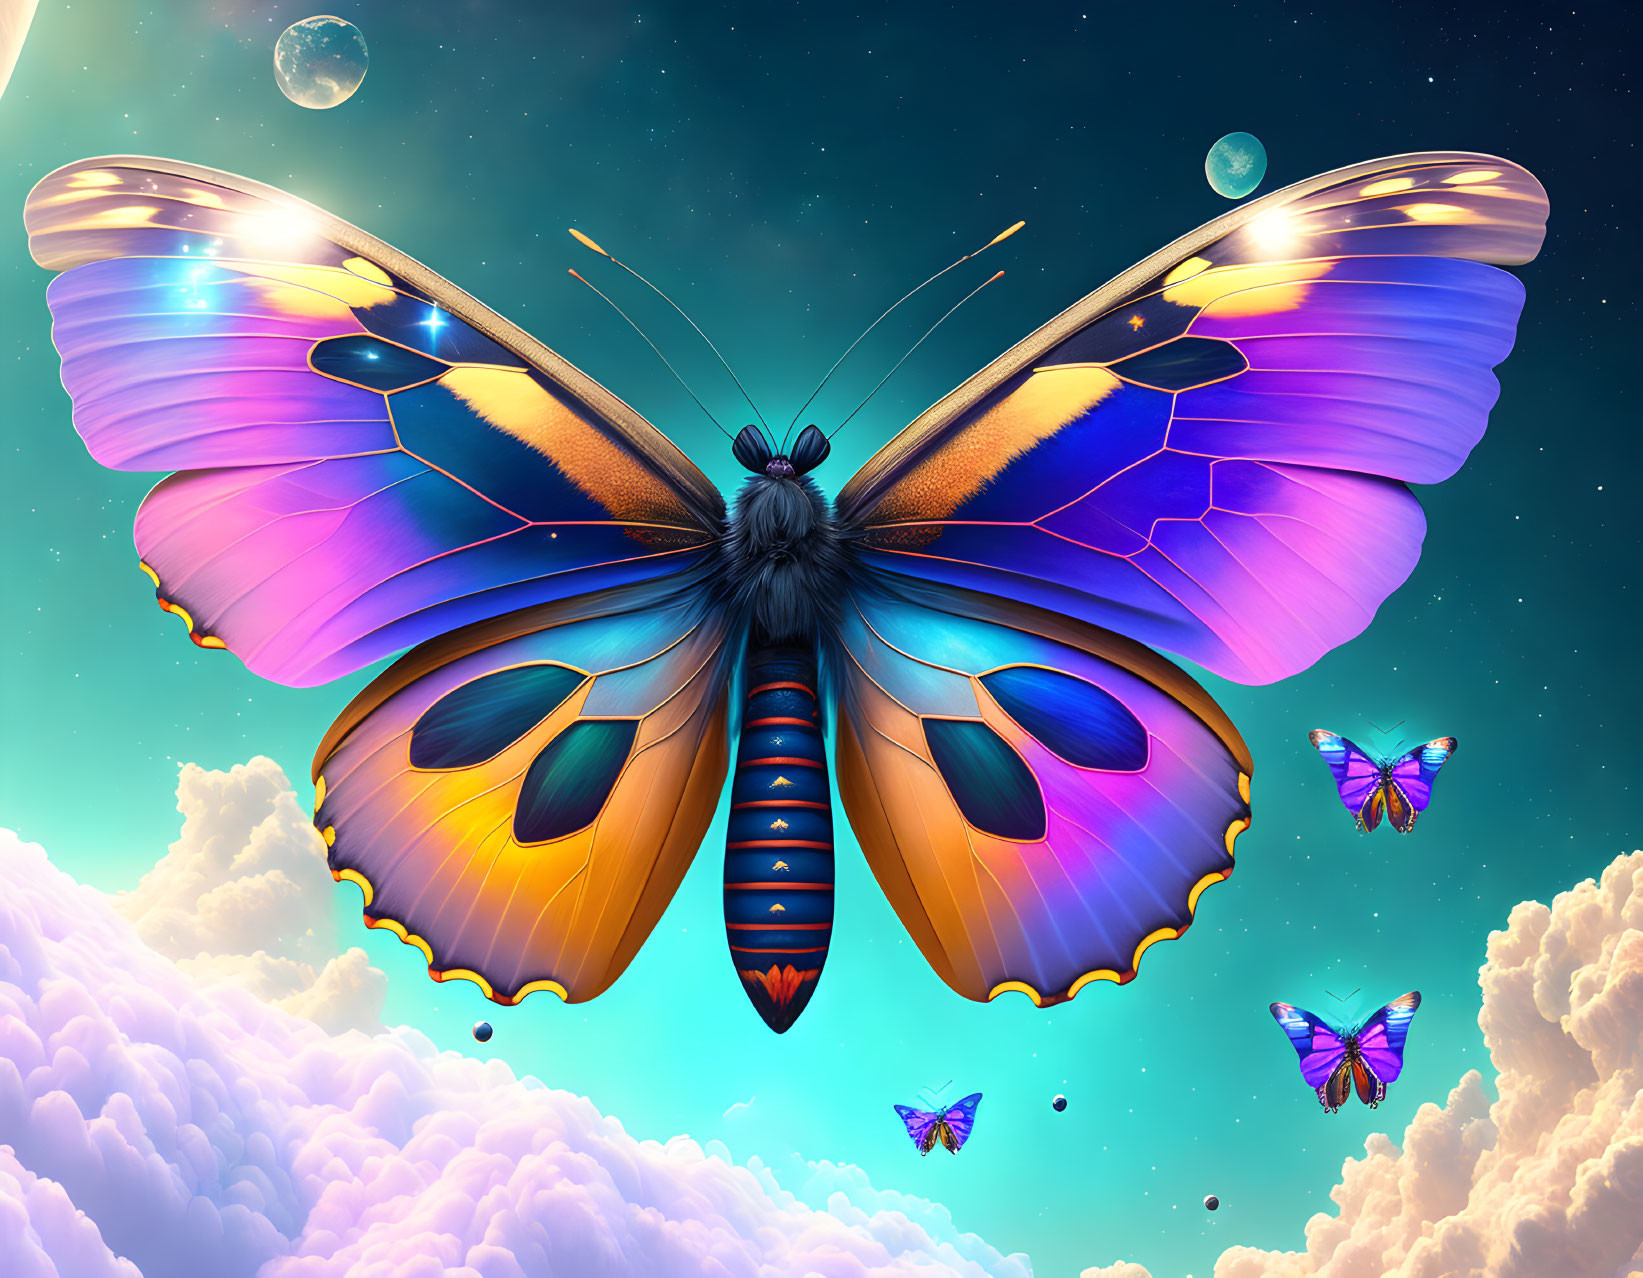 Colorful oversized butterfly in digital artwork with iridescent wings and starry sky background